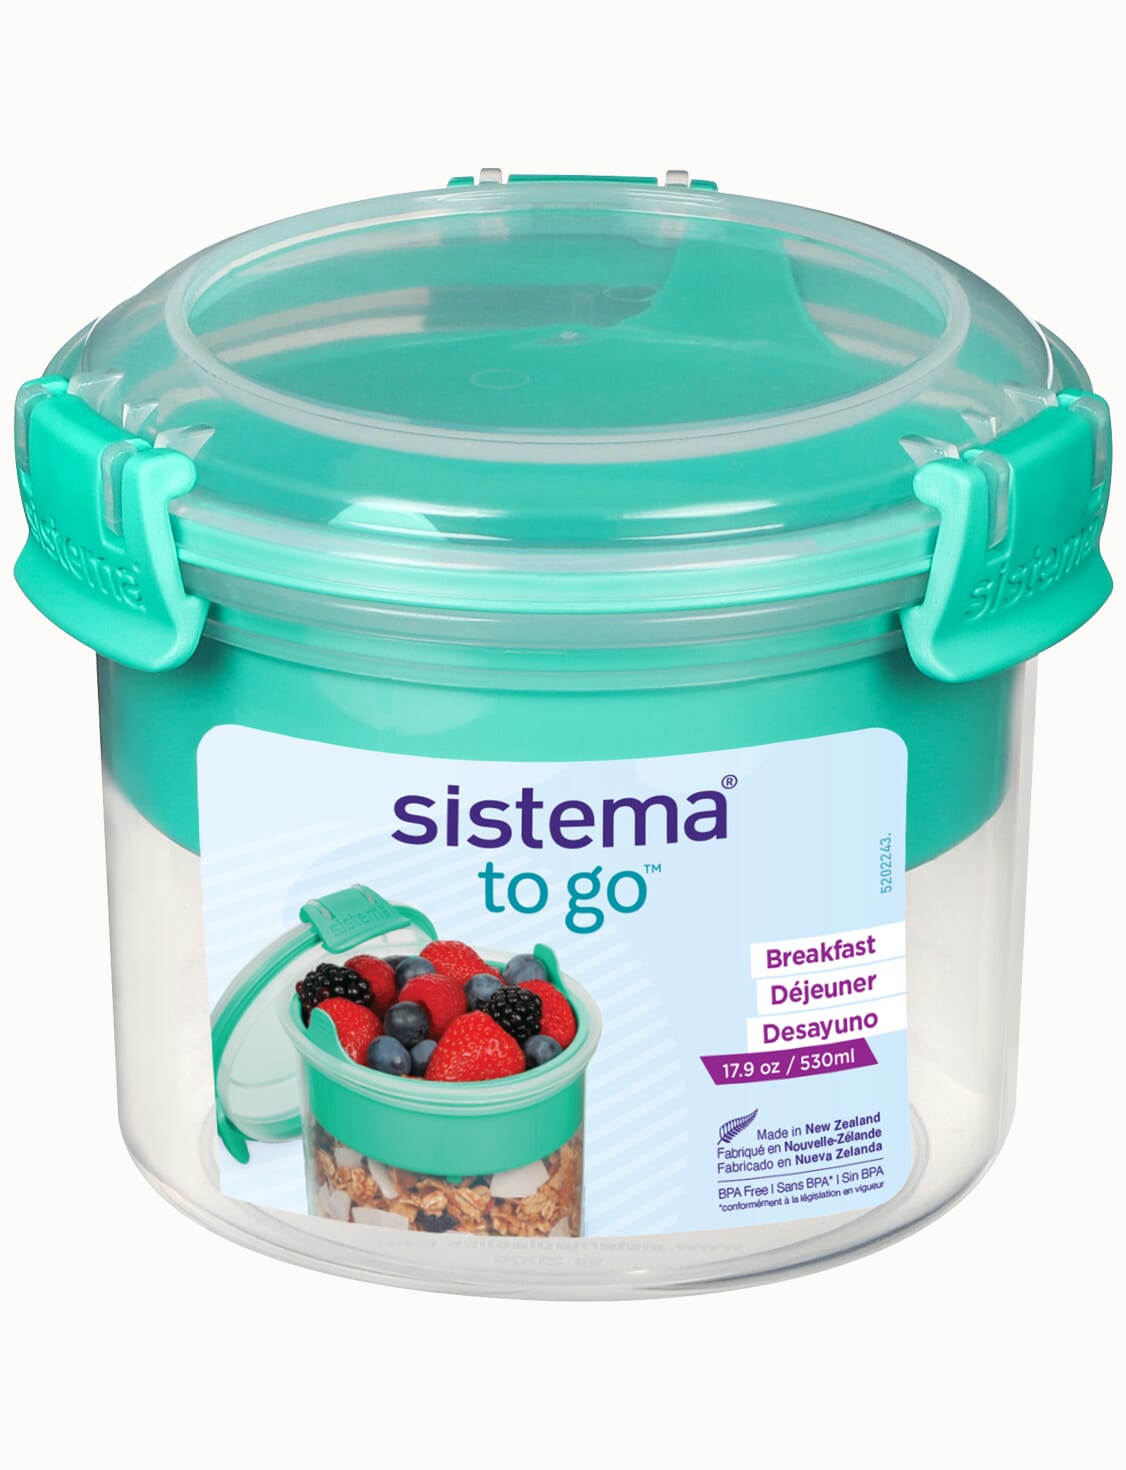 https://stergita.sirv.com/sistema/catalog/product/2/1/21355-53c_530ml_breakfast_togo_label_trilingual_angle_mintyteal.png?canvas.color=fcfbf8